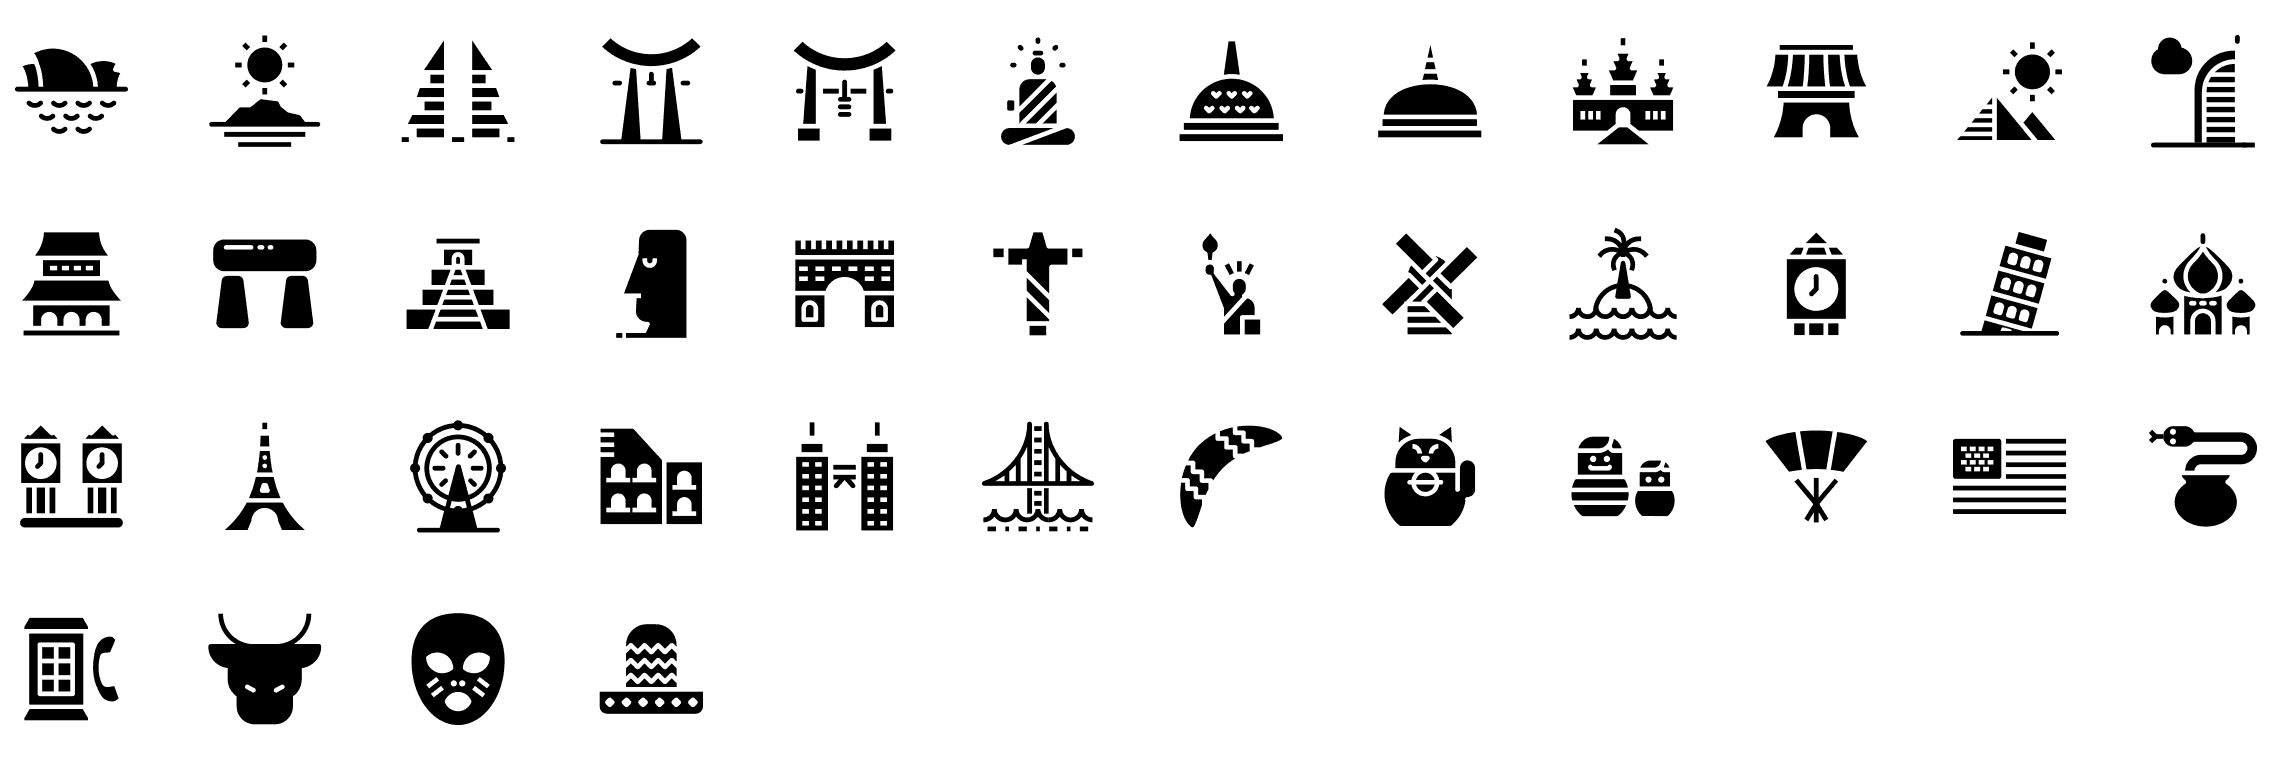 world-landmarks-glyph-icons-preview